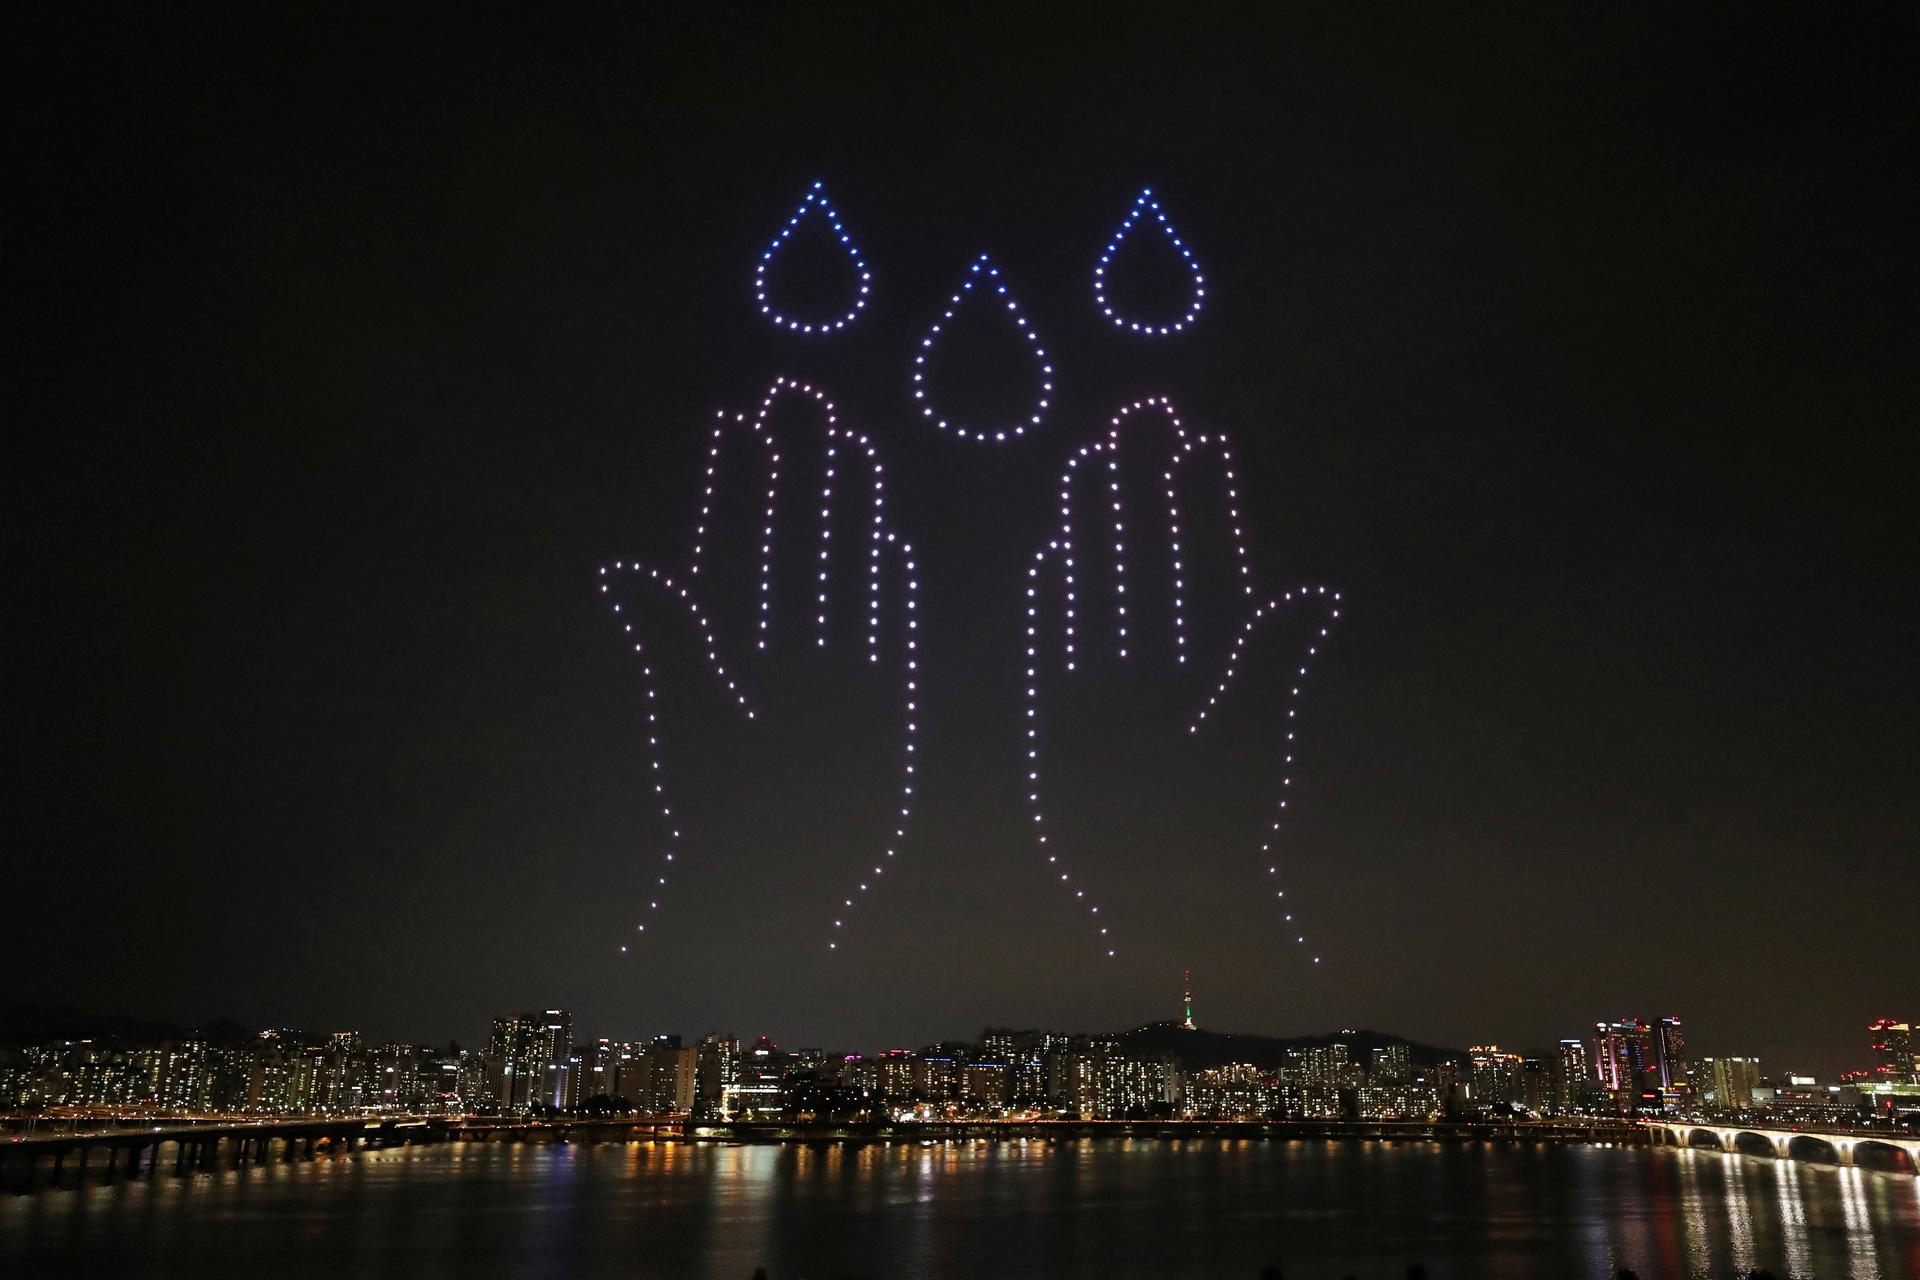 Two hand and three drops of water are drawn in the sky with the lights of small drones in Seoul.